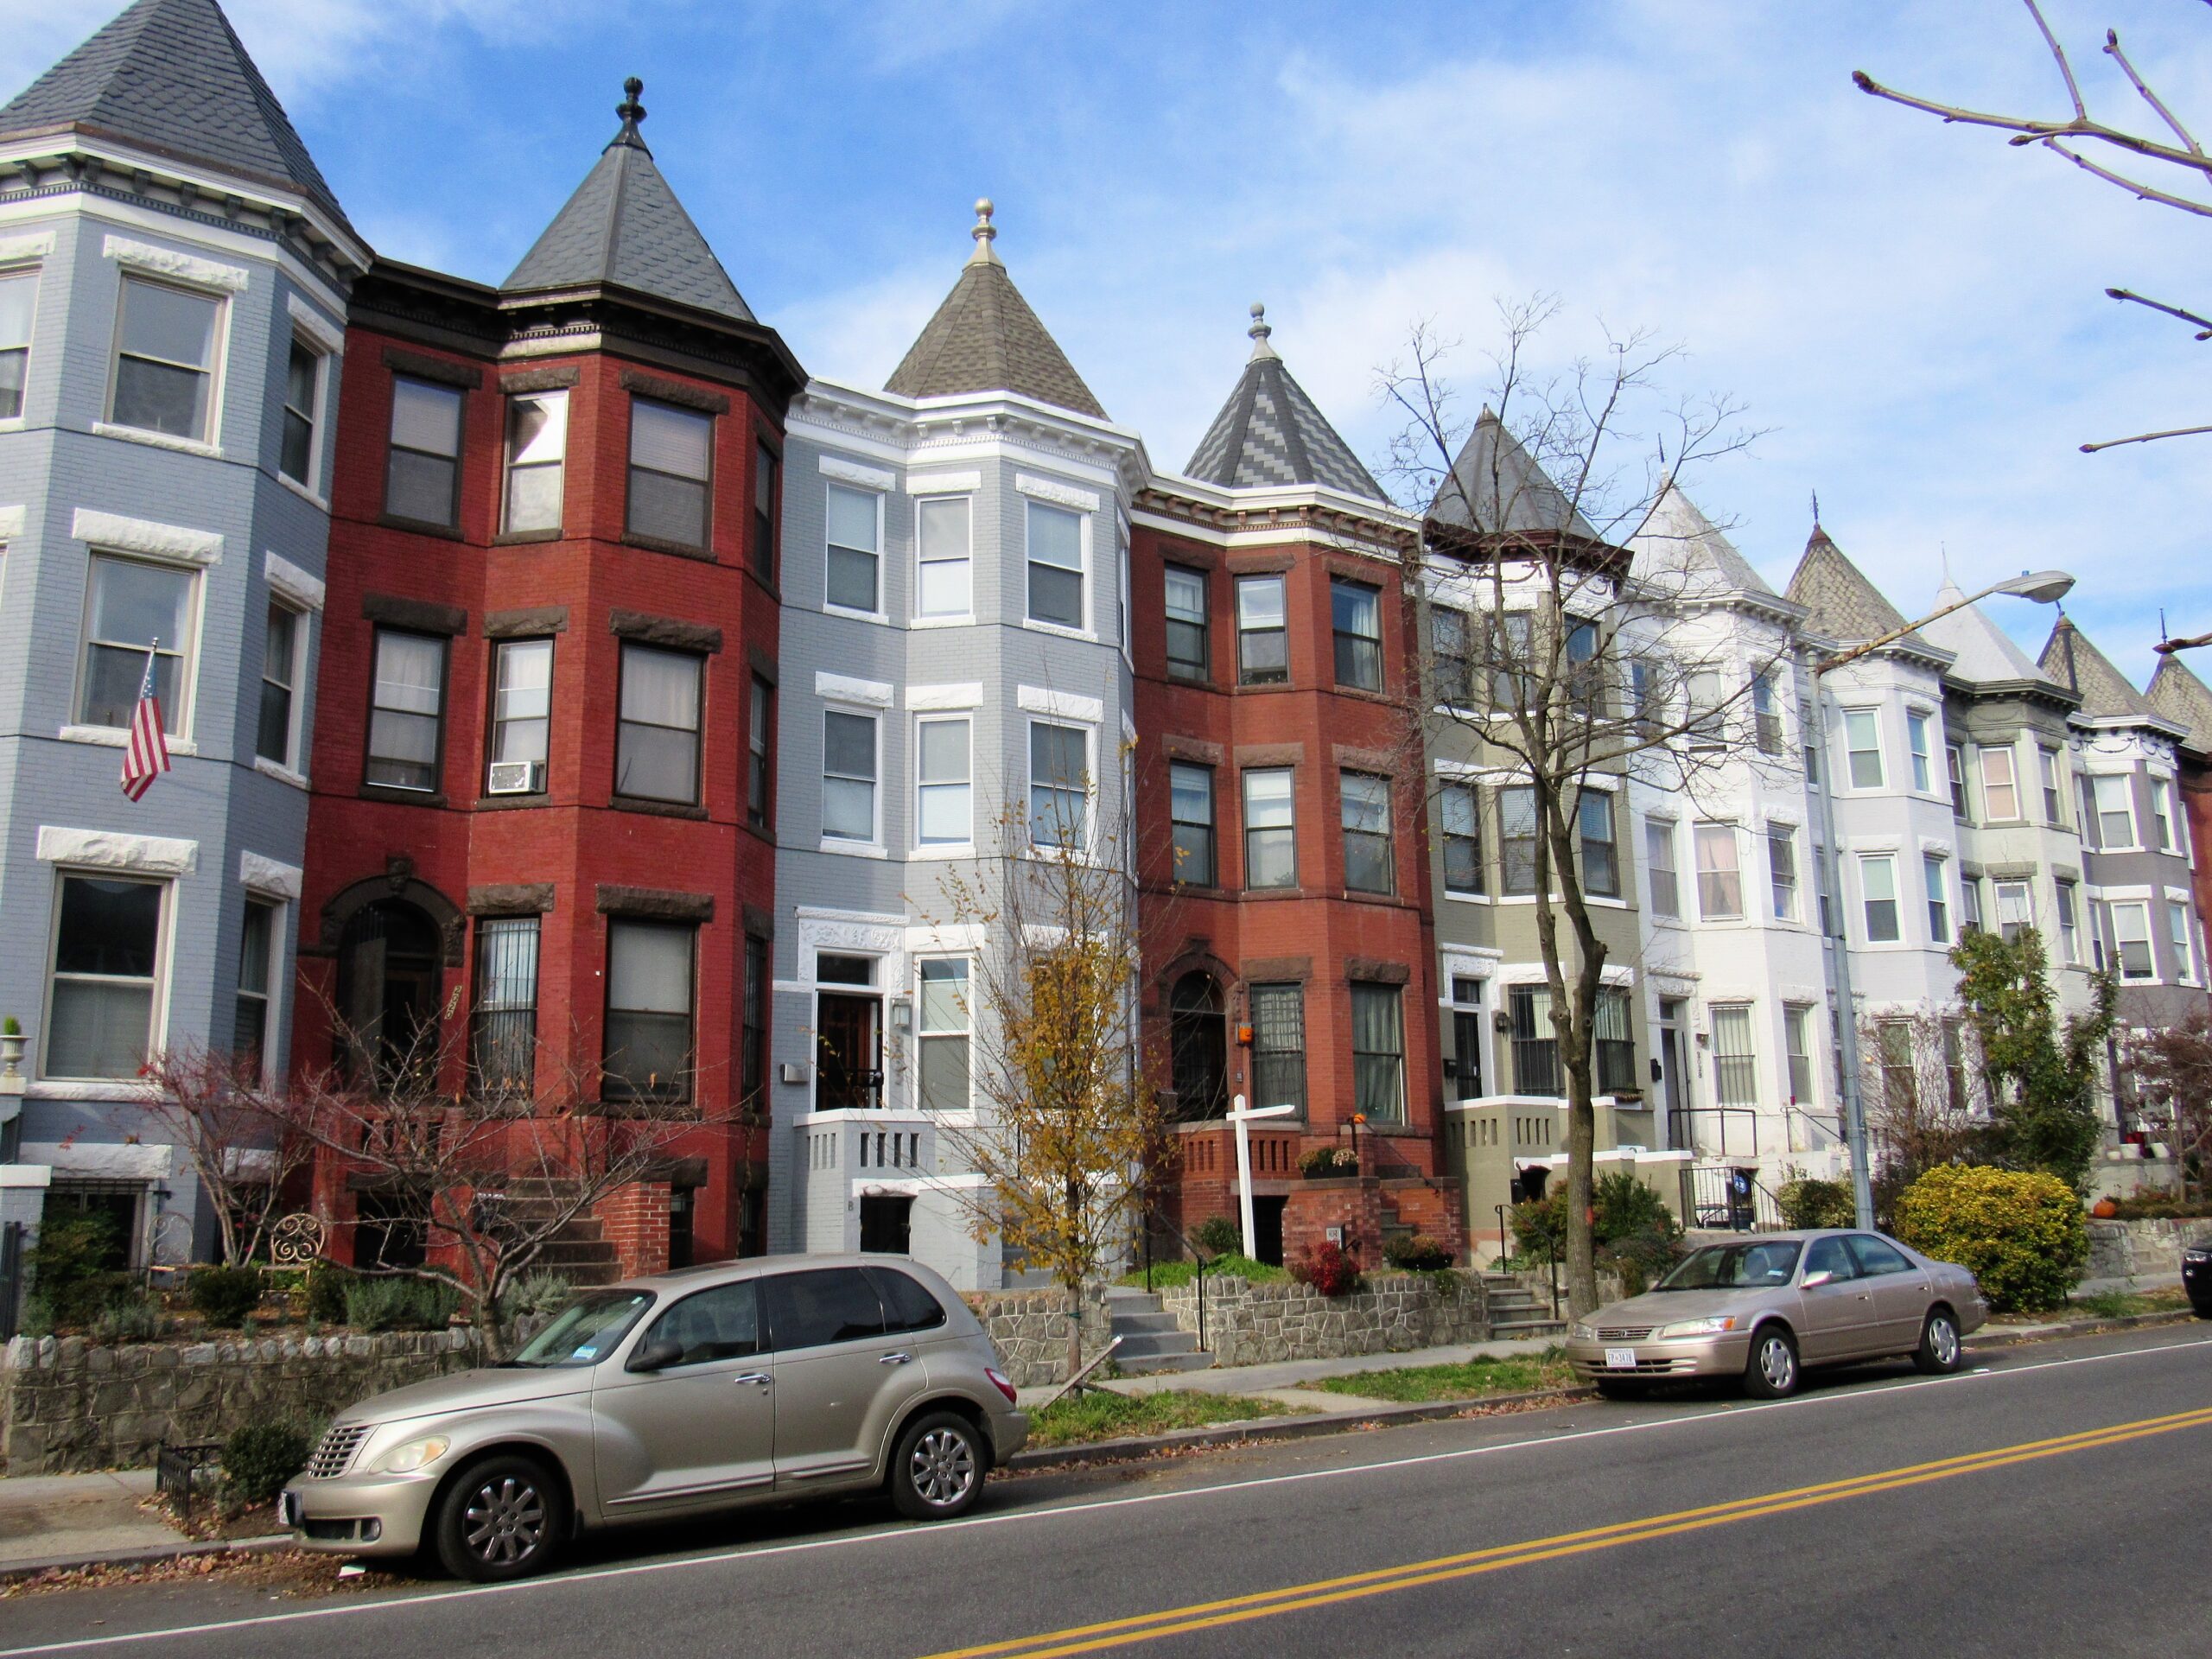 A block of connected row houses.